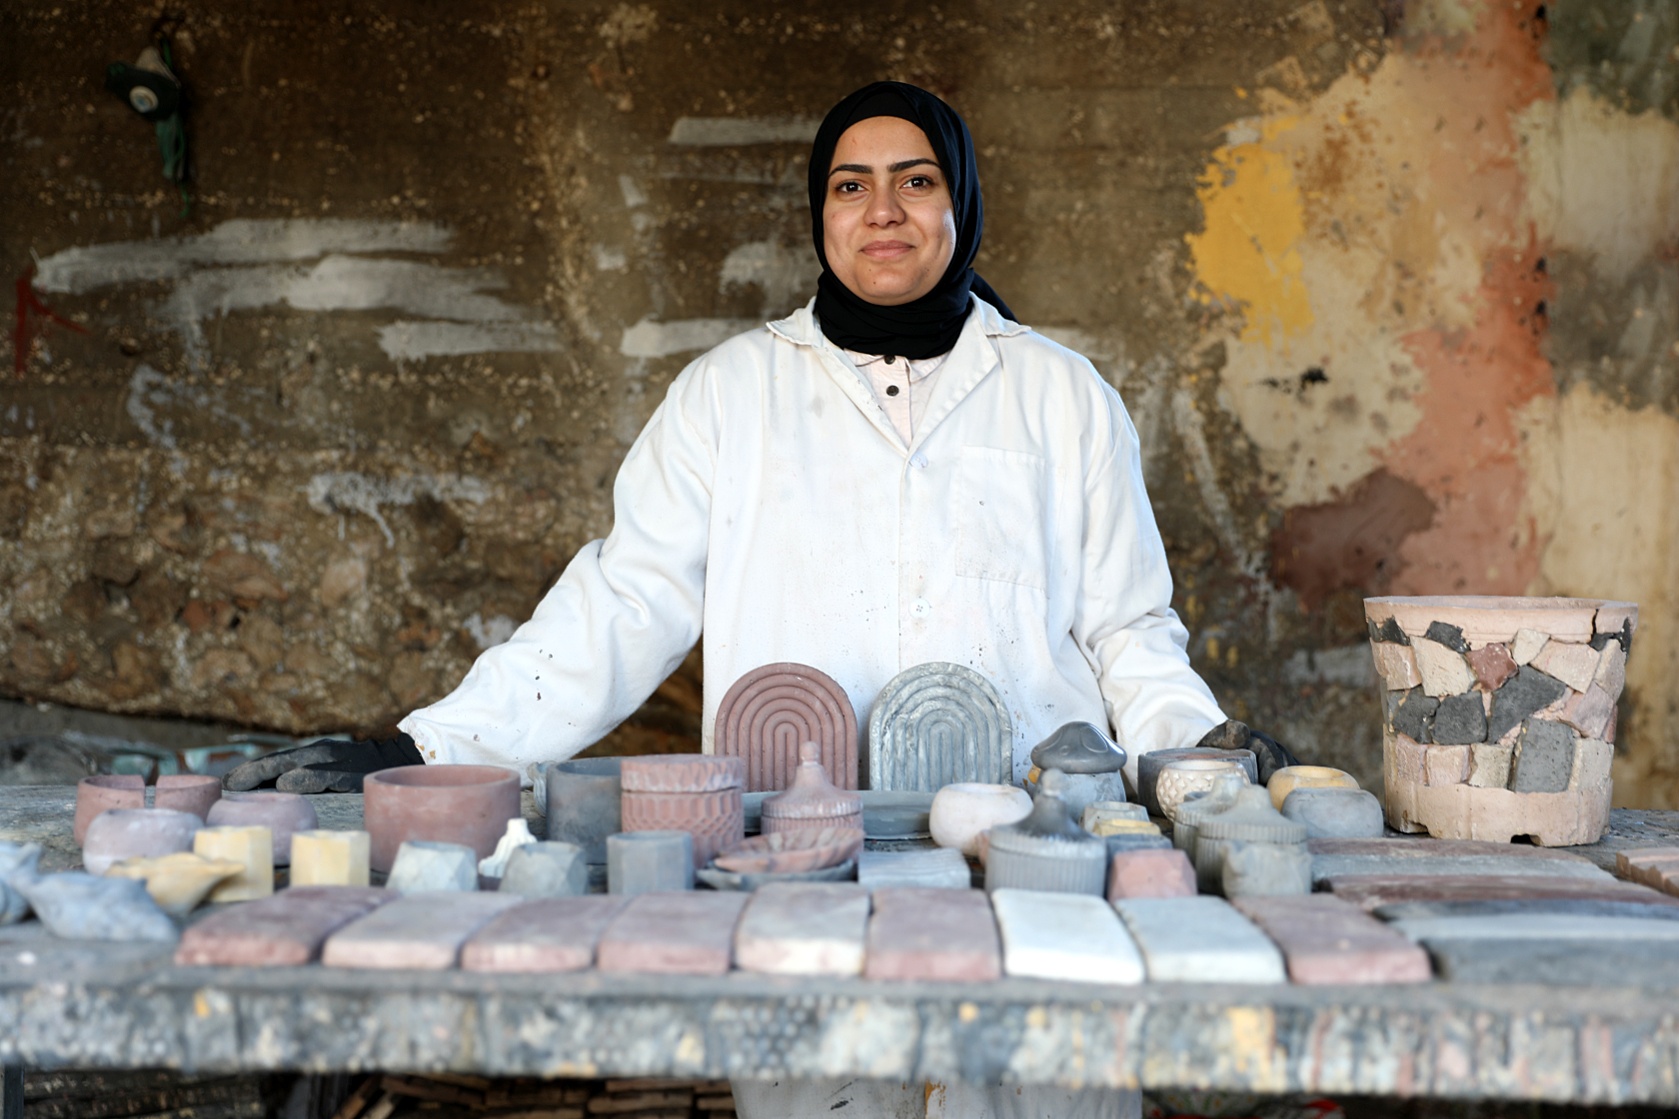 Rawan and the products she produced out of used glass and turned into eco-friendly decorative stones, sold in the market for approximately $15 per square meter.